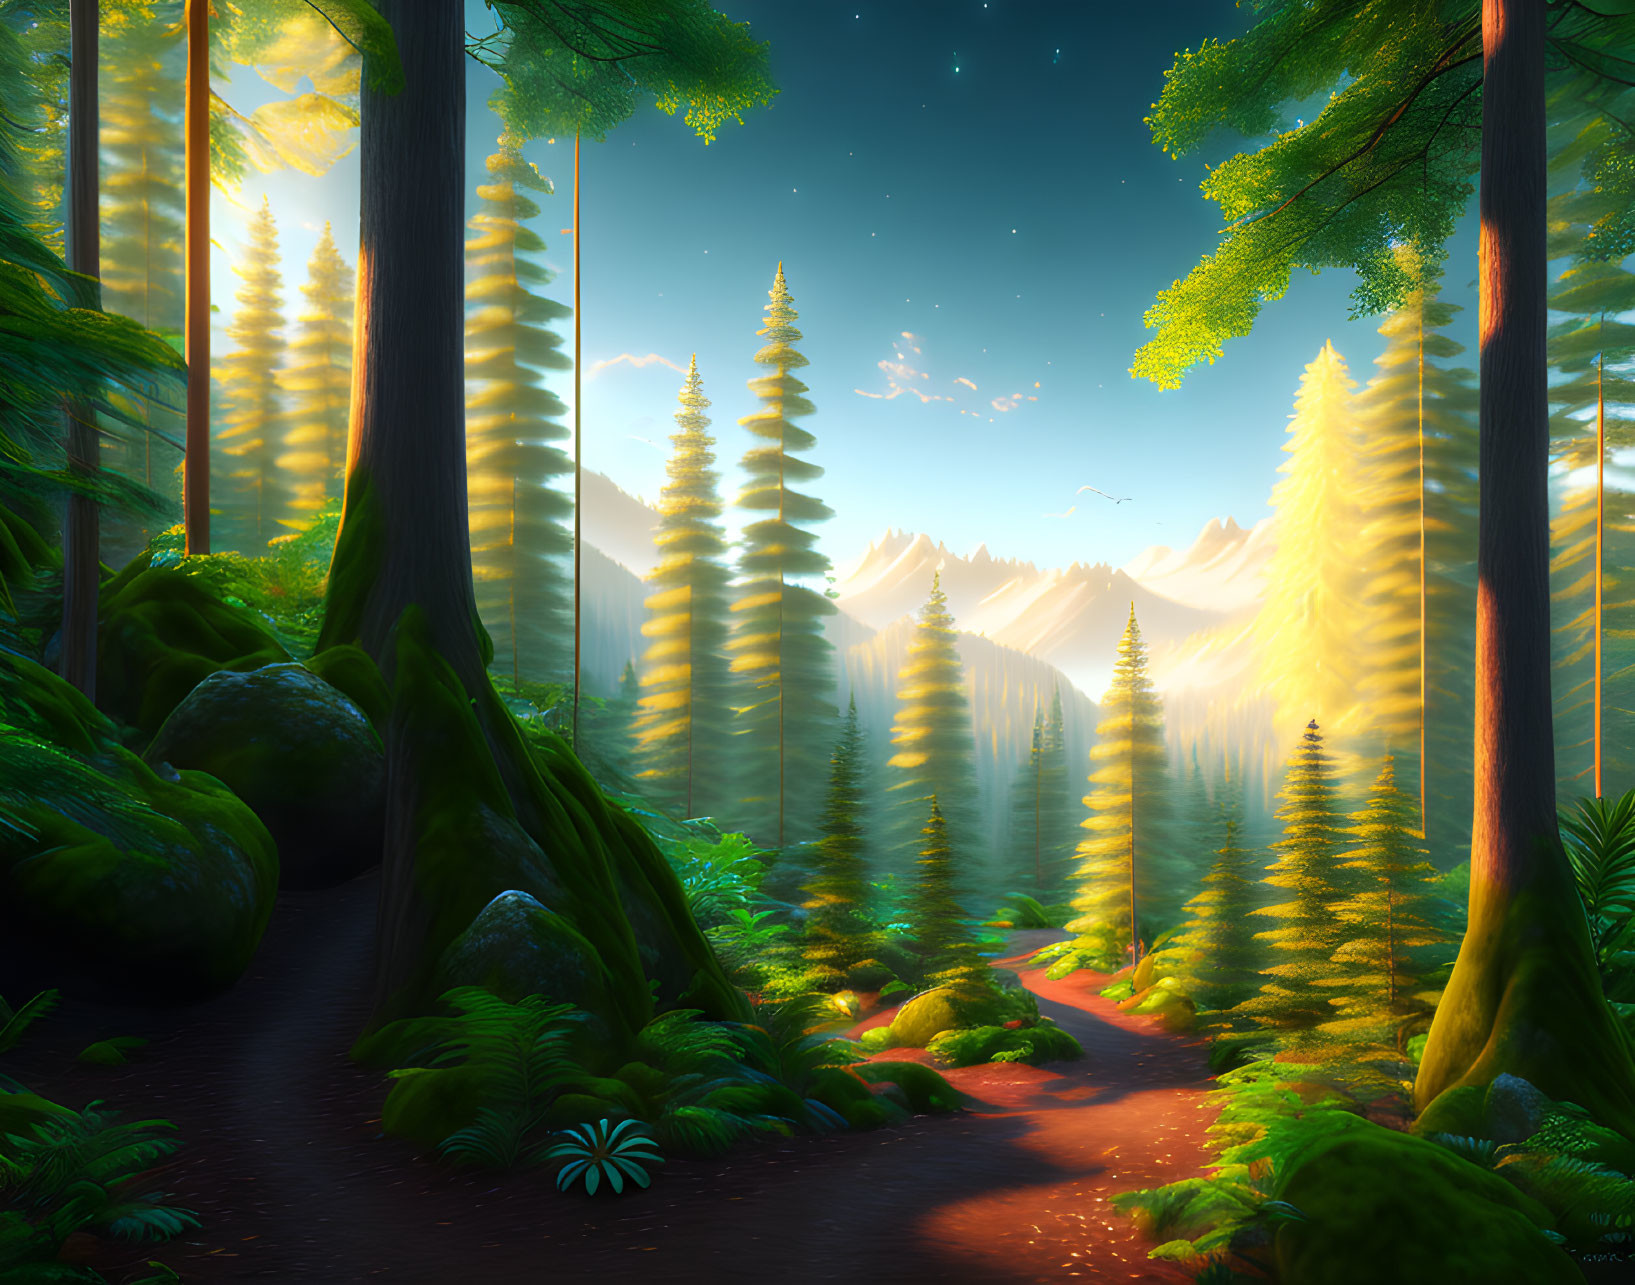 Tranquil forest scene with tall trees, sun rays, path, mountains, and starry sky